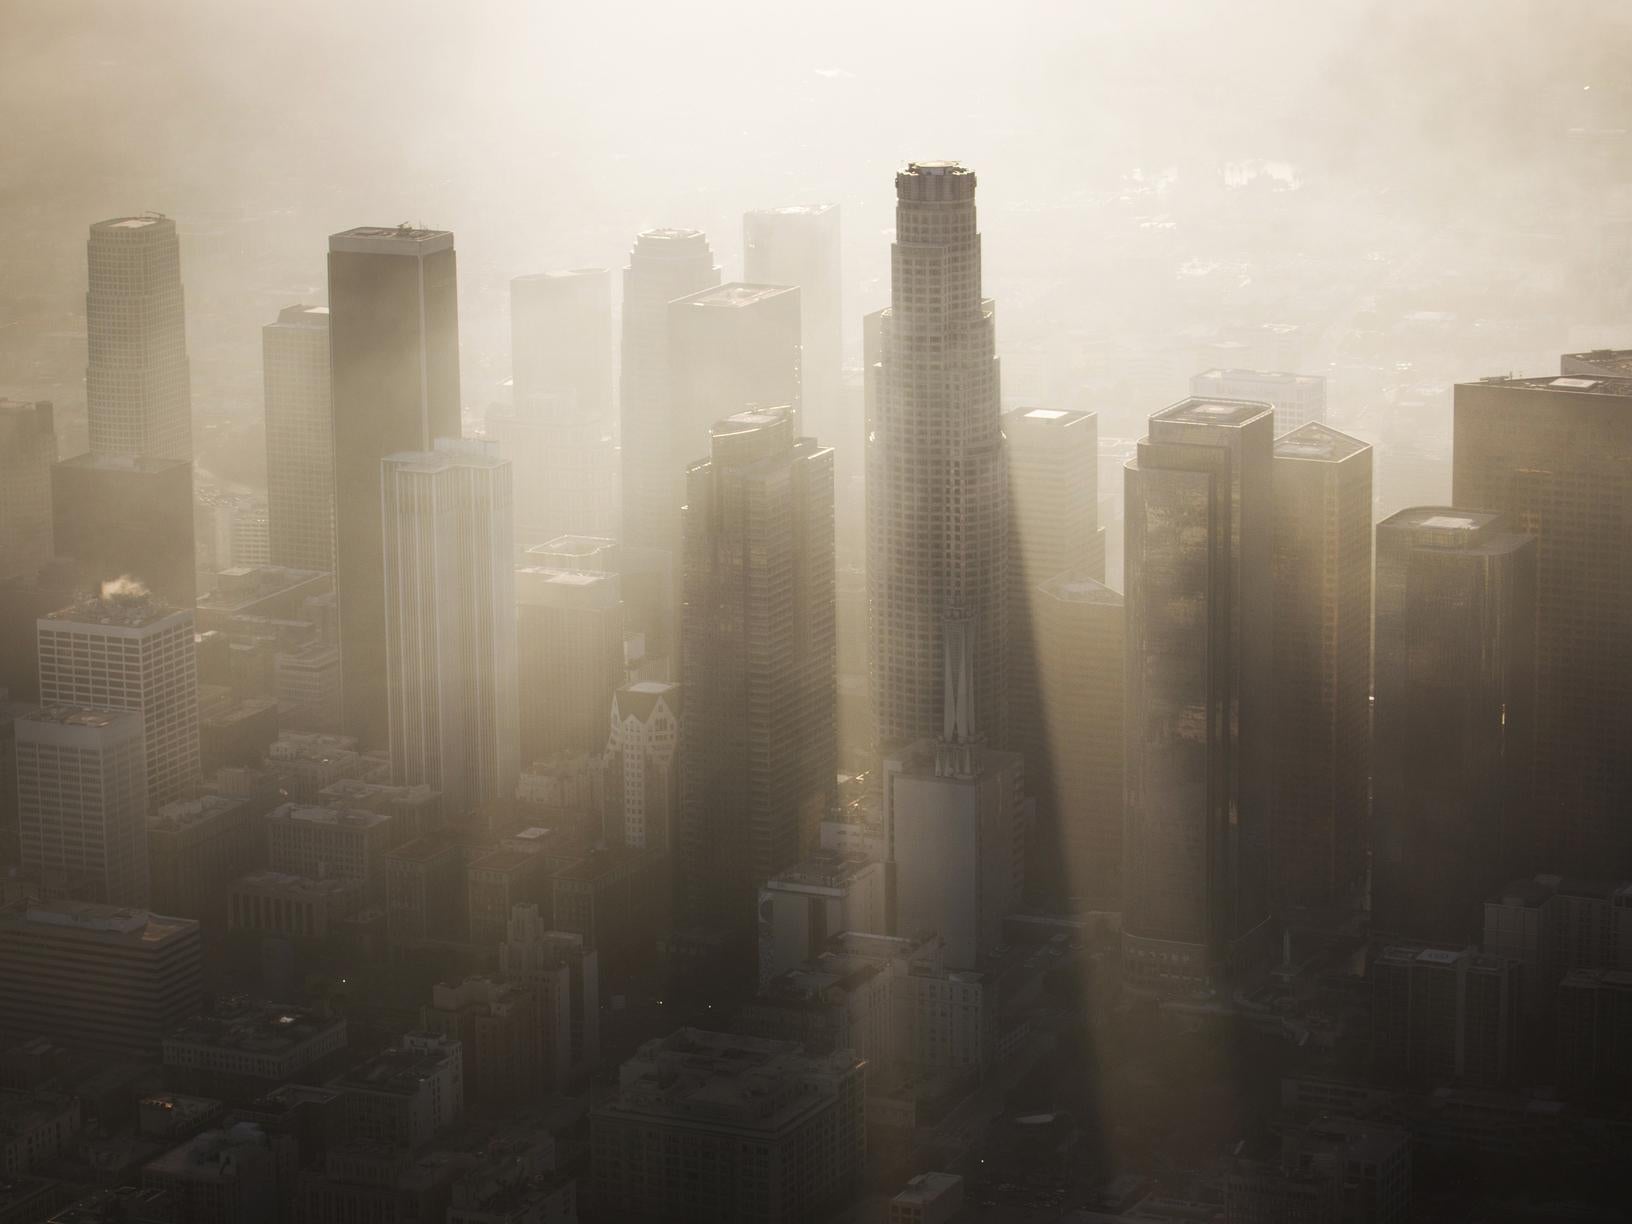 Scientists conducted research in the heavily polluted city of Los Angeles, where vehicles are no longer the main polluters